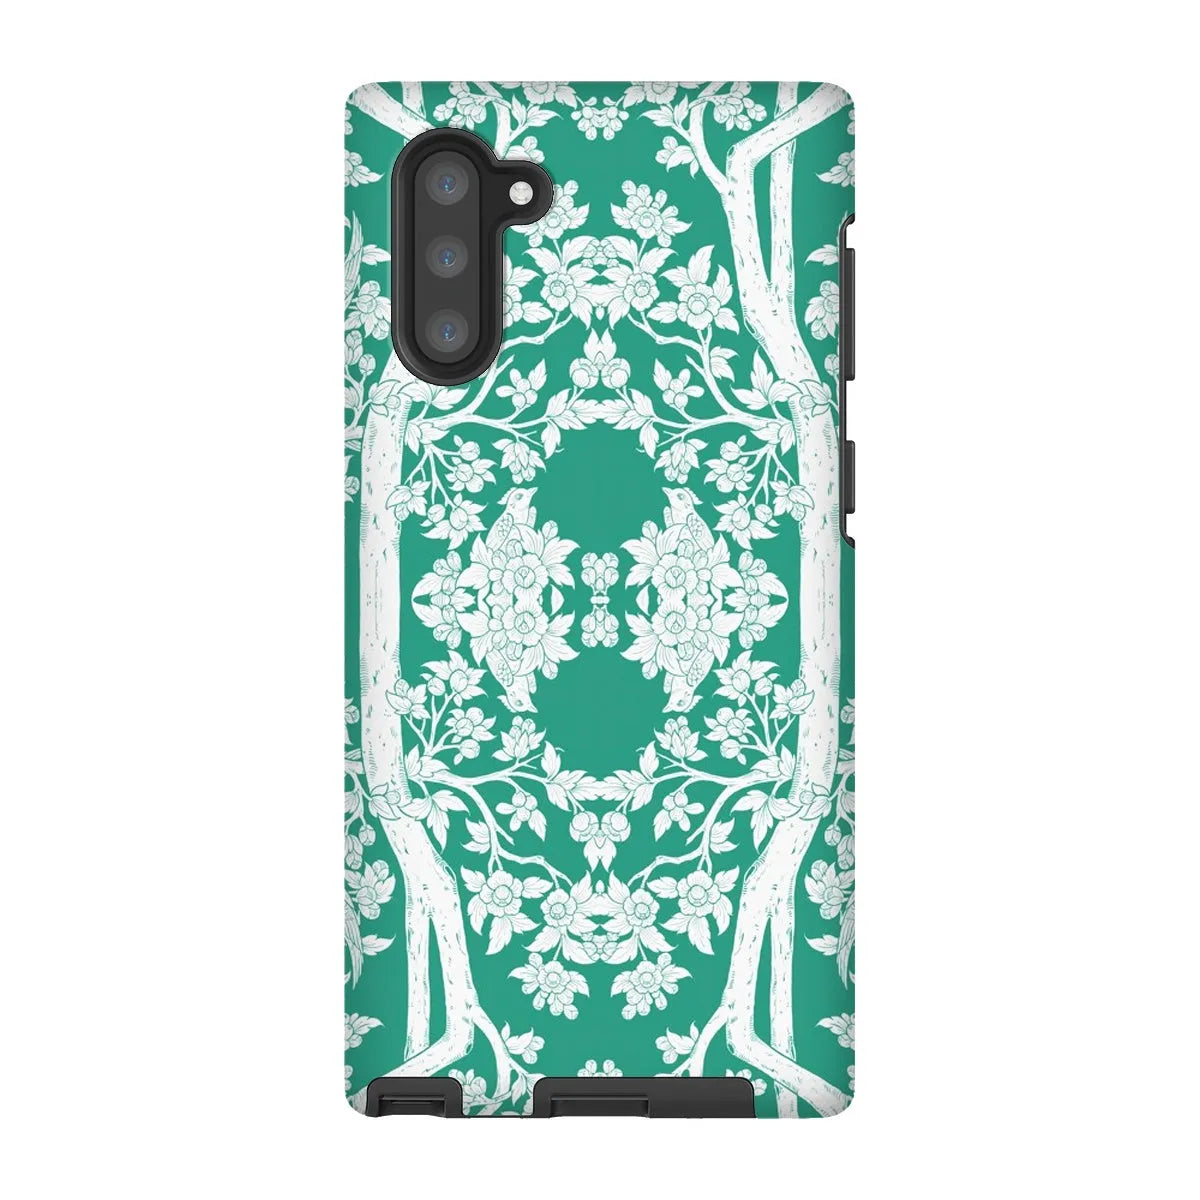 Aviary Green Aesthetic Pattern Art Phone Case - Samsung Galaxy Note 10 / Matte - Mobile Phone Cases - Aesthetic Art